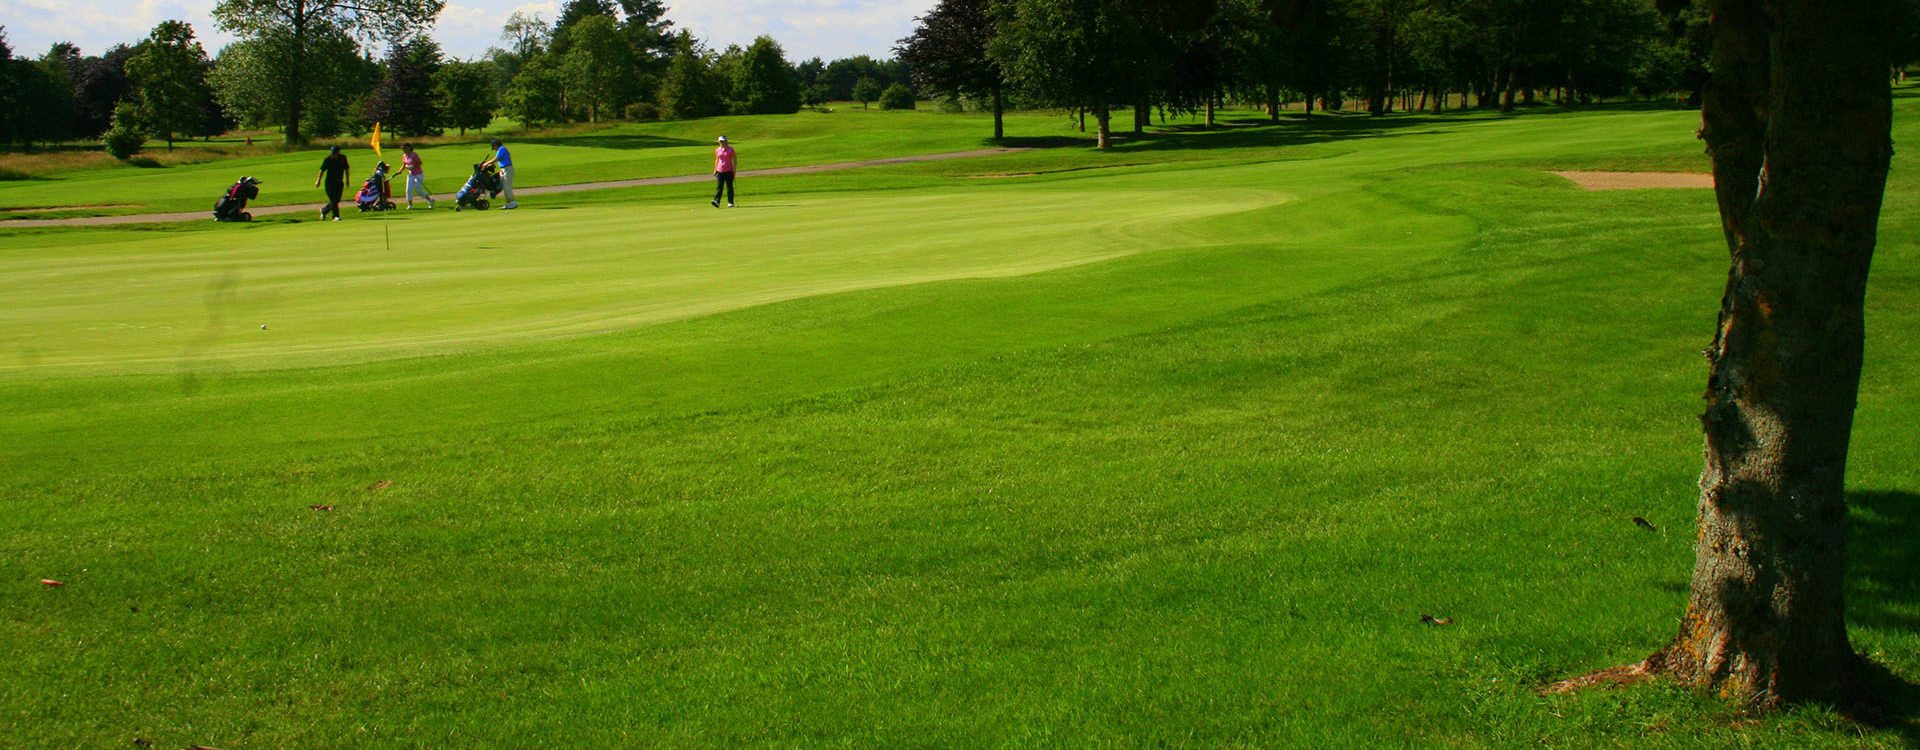 County Carlow Golf Classic - Carlow Tourism